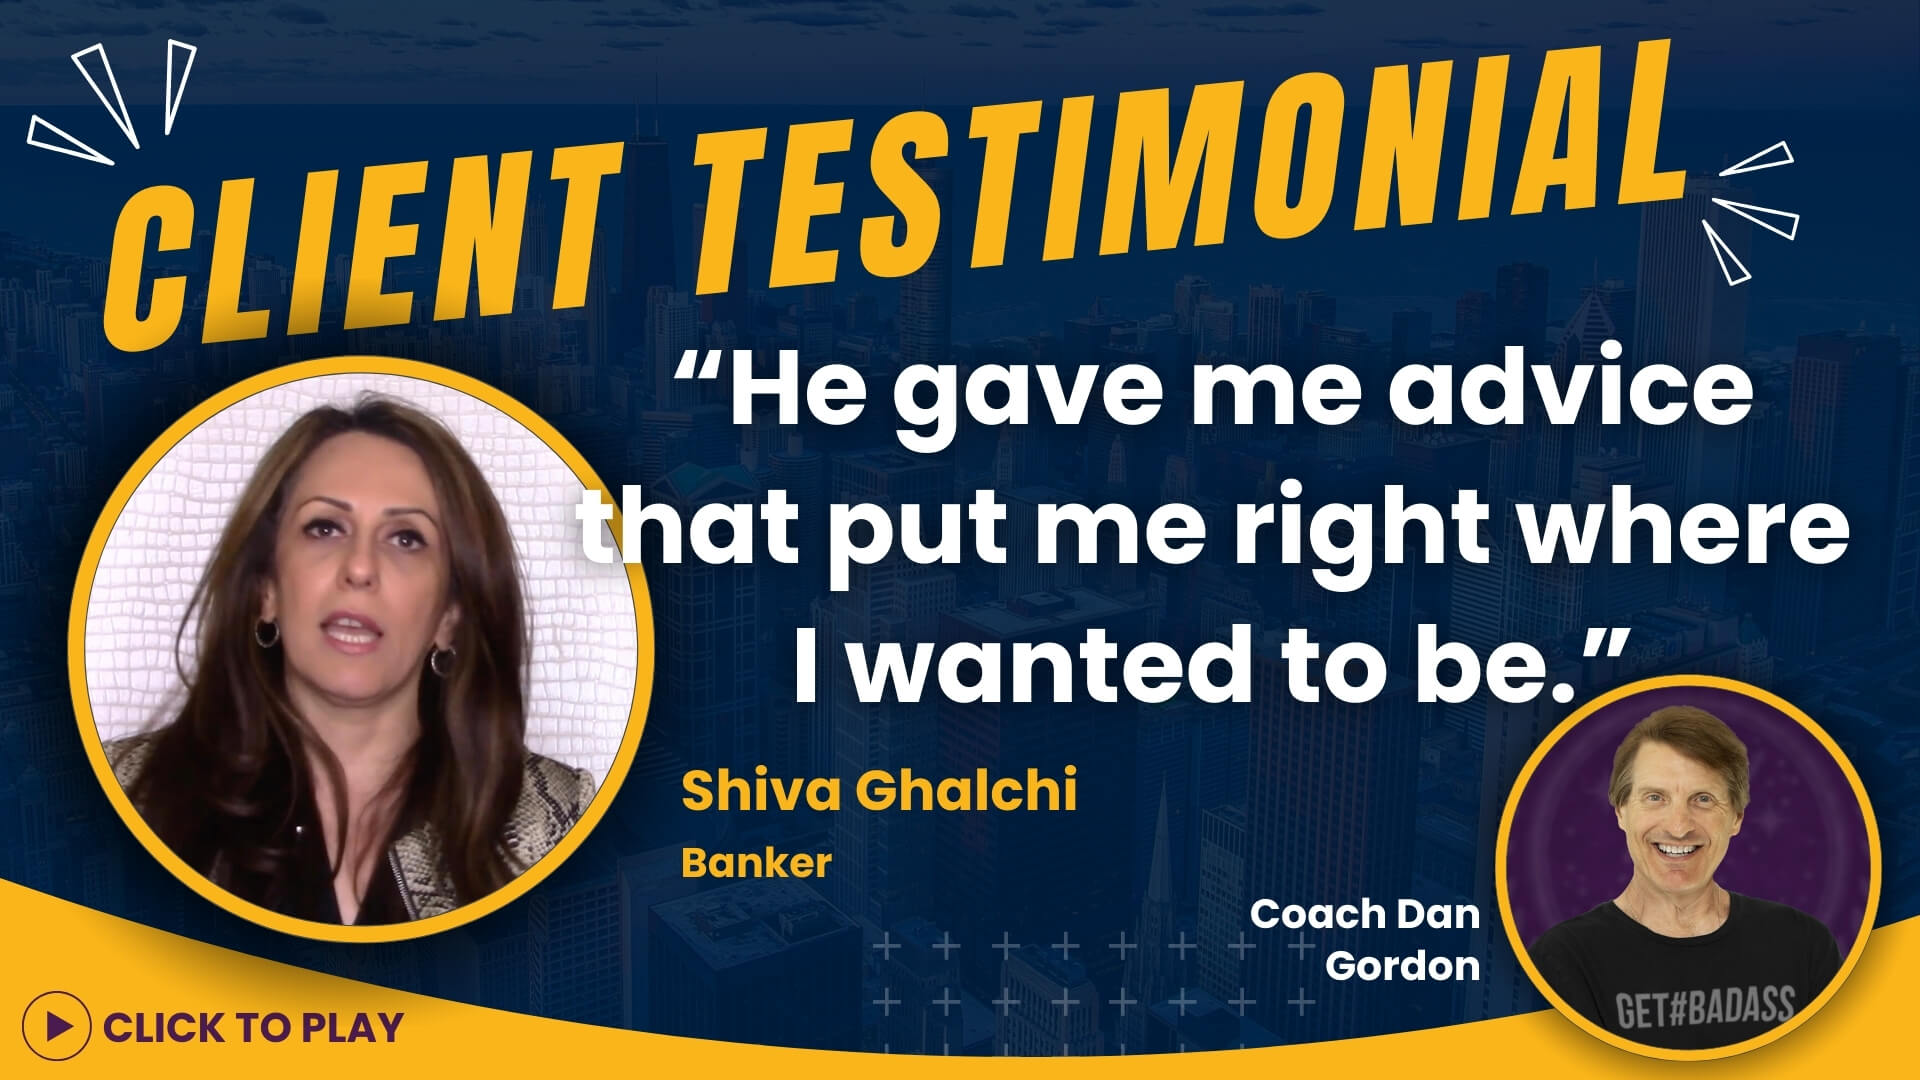 Shiva Ghalchi, a professional banker, provides a testimonial praising Coach Dan Gordon's advice that positioned her where she wanted to be in her career.